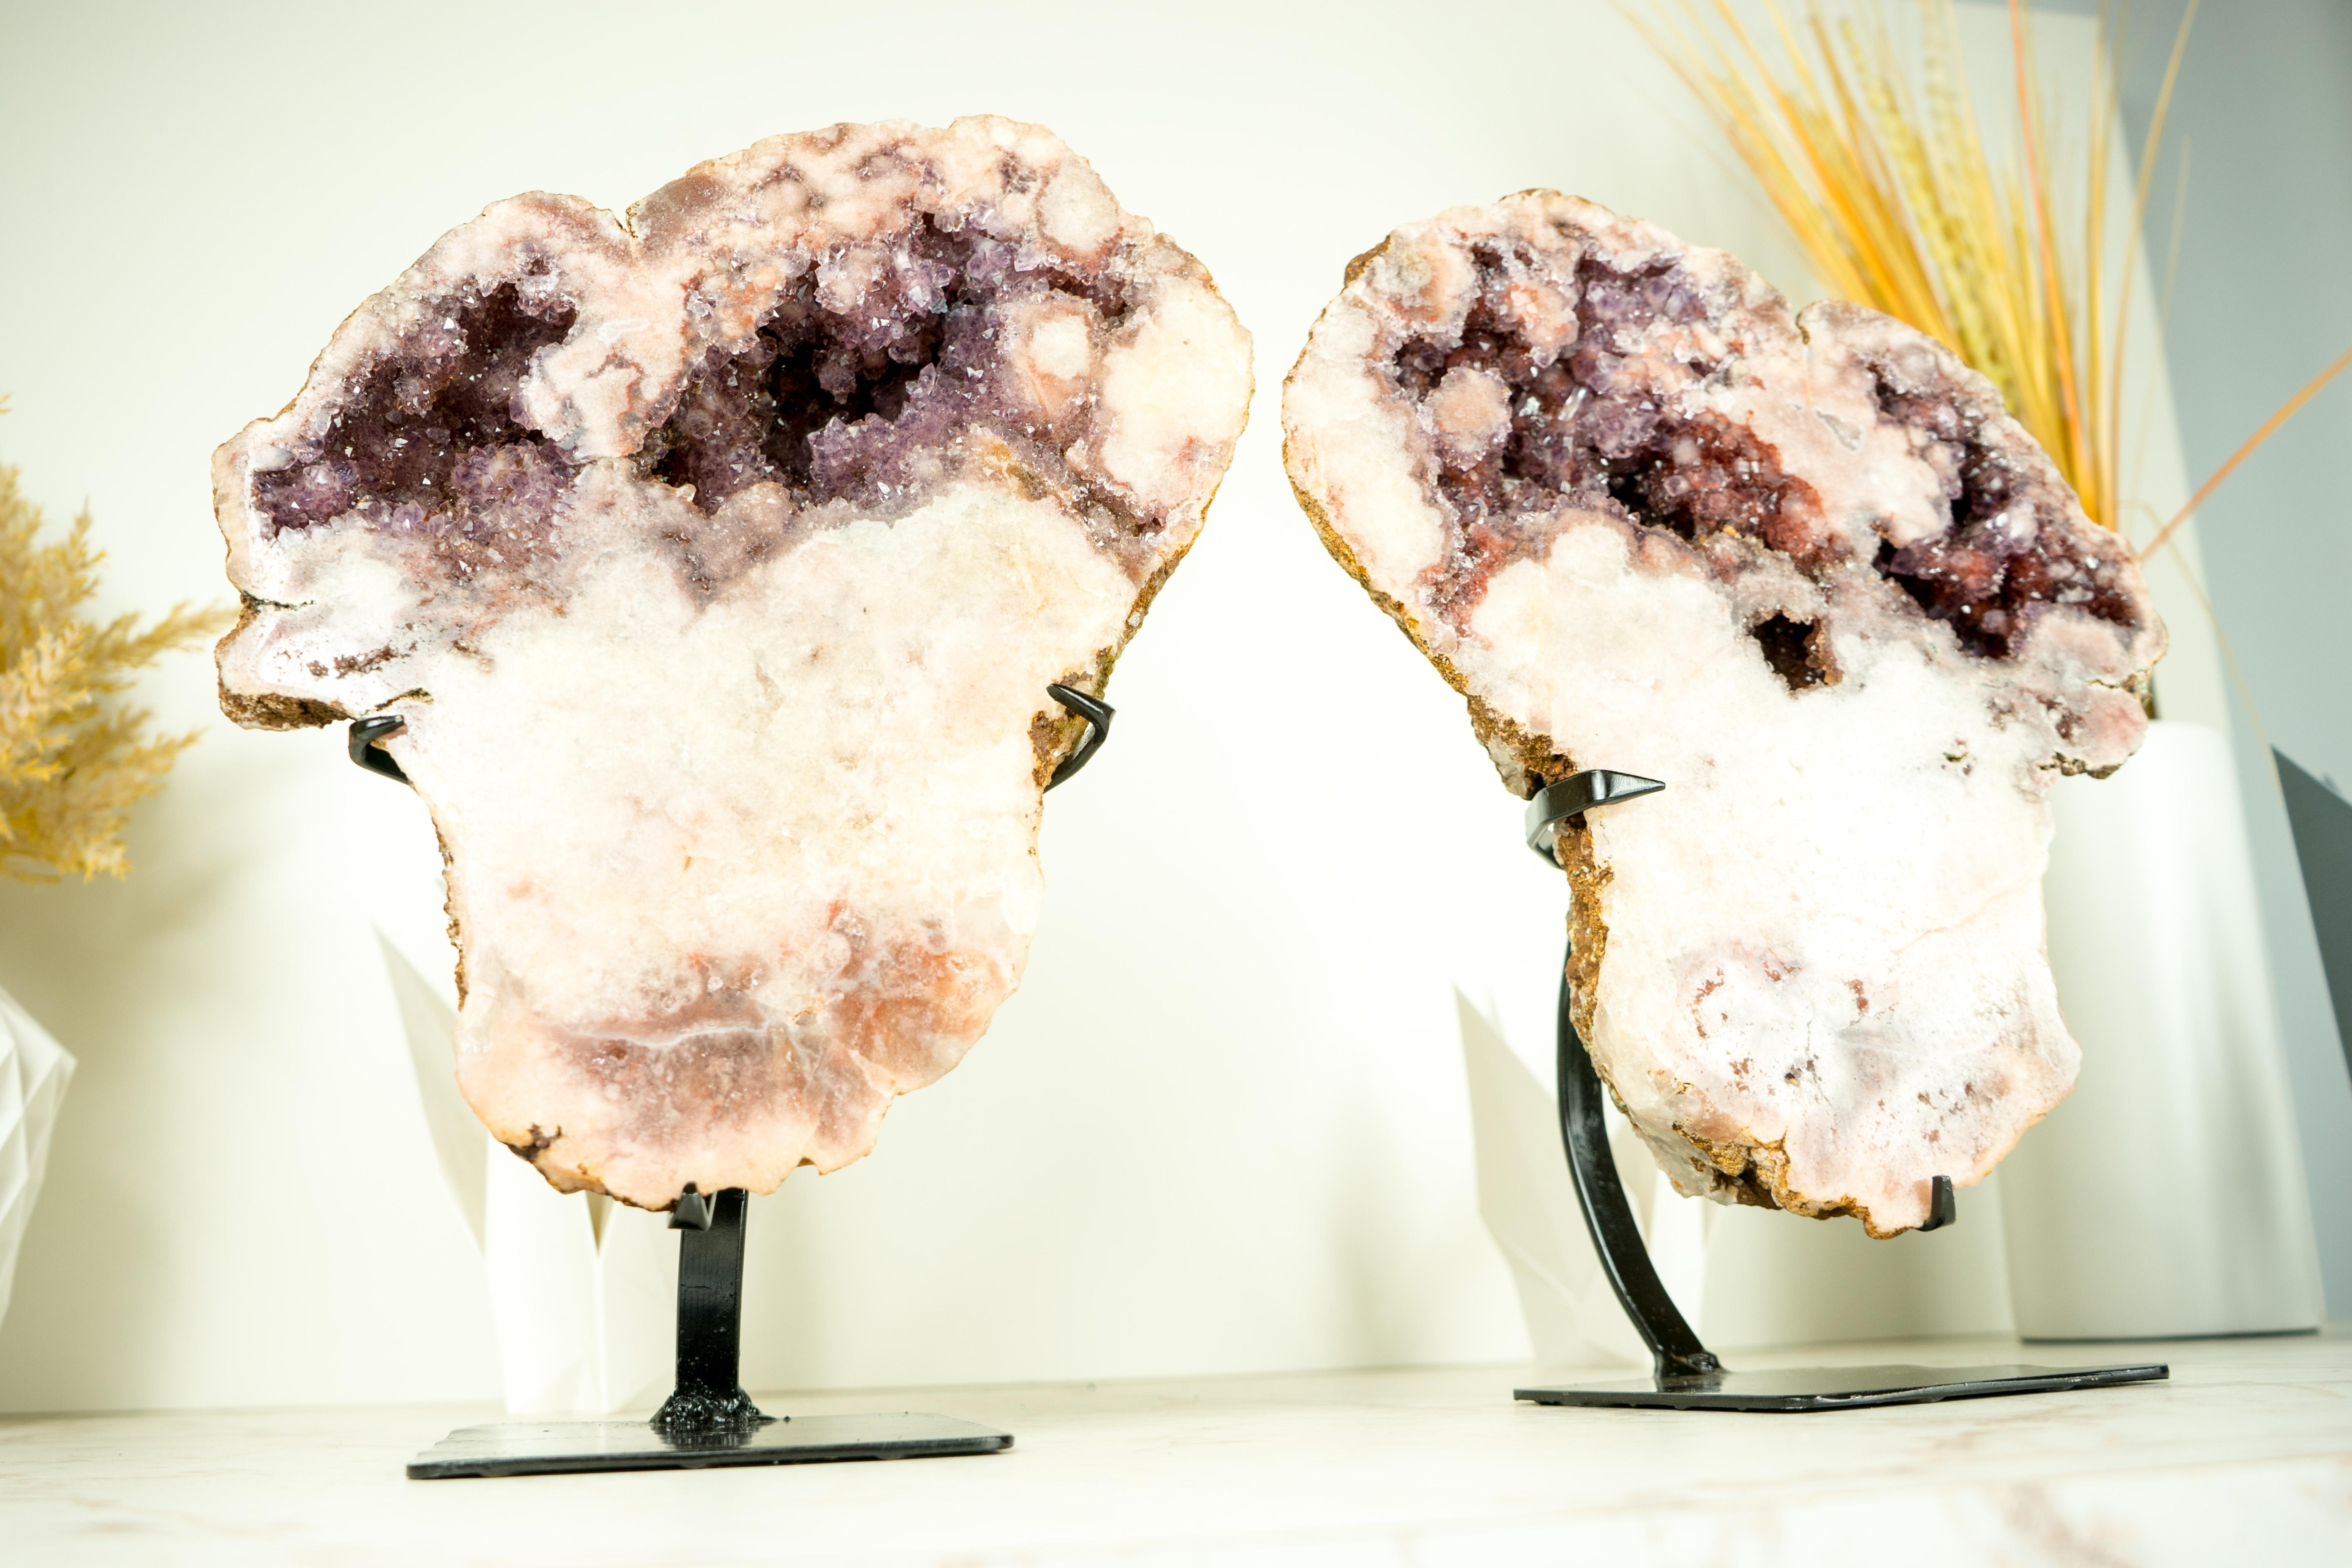 Brazilian Rare Pair of All-Natural Pink Amethyst Geodes with Red and Lavender Amethyst For Sale